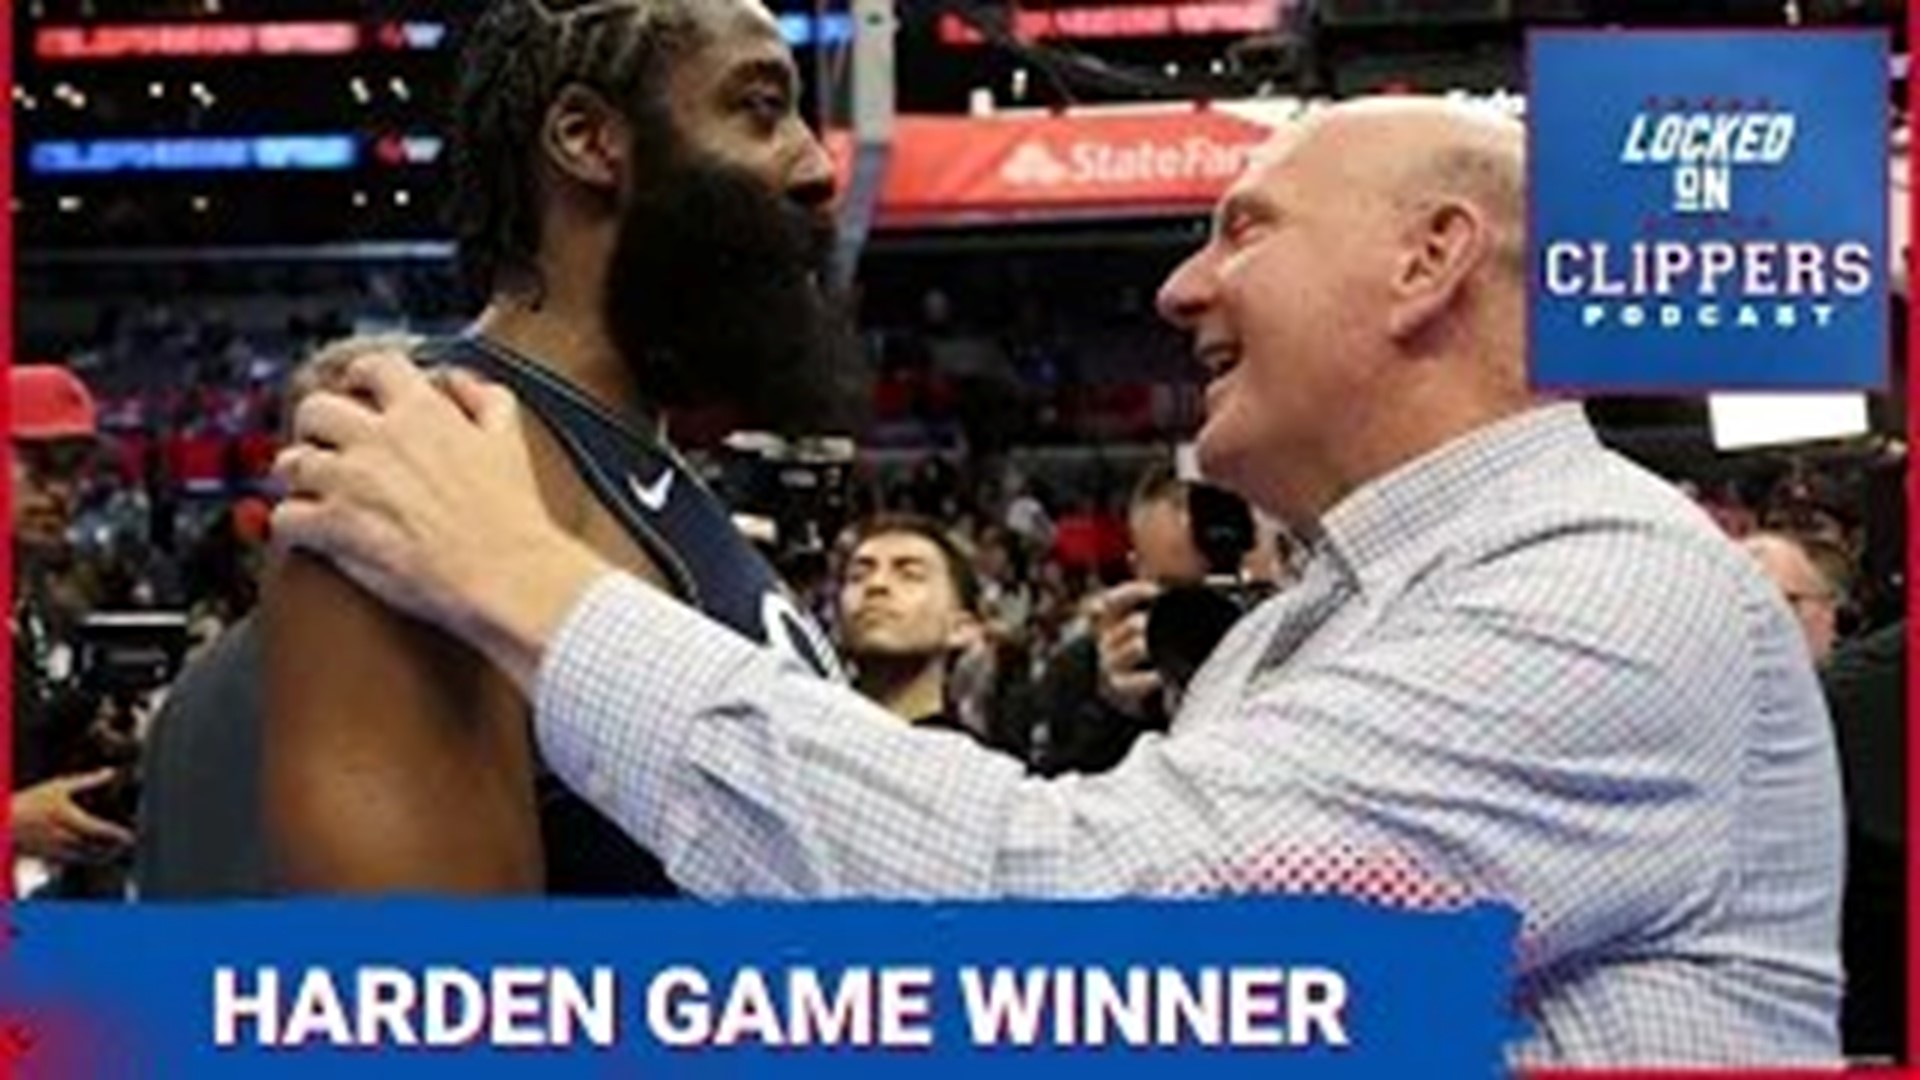 James Harden's LA Clipper tenure has officially begun after his first win came in dramatic fashion vs his former team, the Houston Rockets.